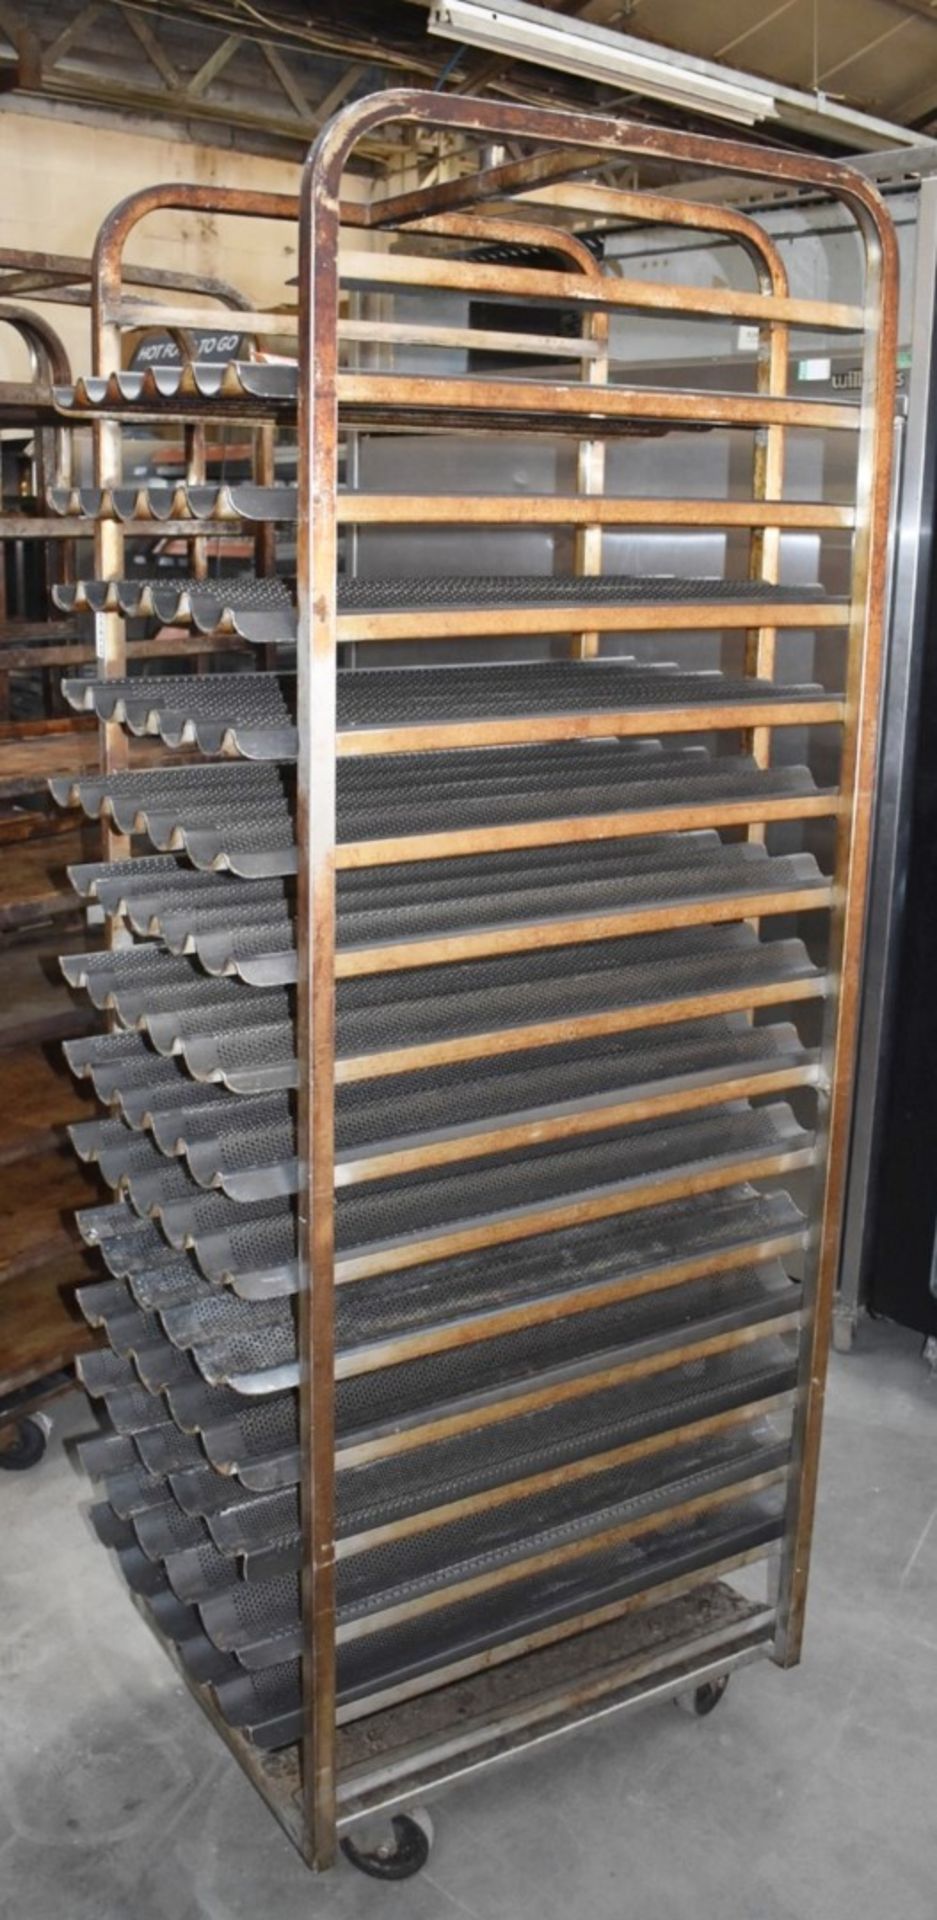 1 x Upright Mobile Baking Rack With Fourteen Baguette Trays - Image 3 of 6